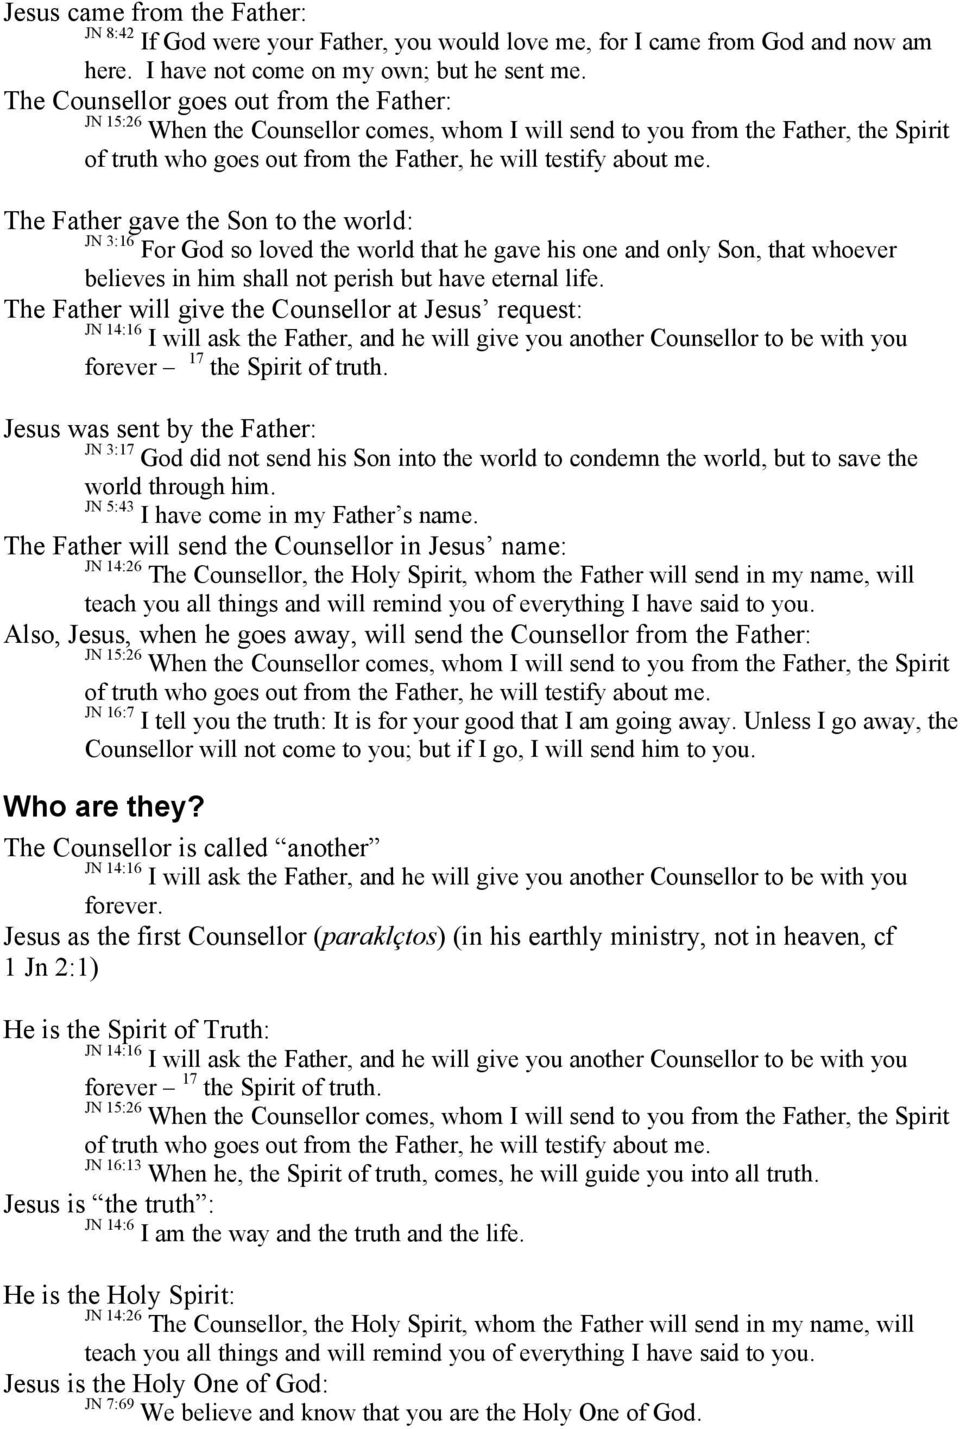 have eternal life. The Father will give the Counsellor at Jesus request: forever 17 the Spirit of truth.